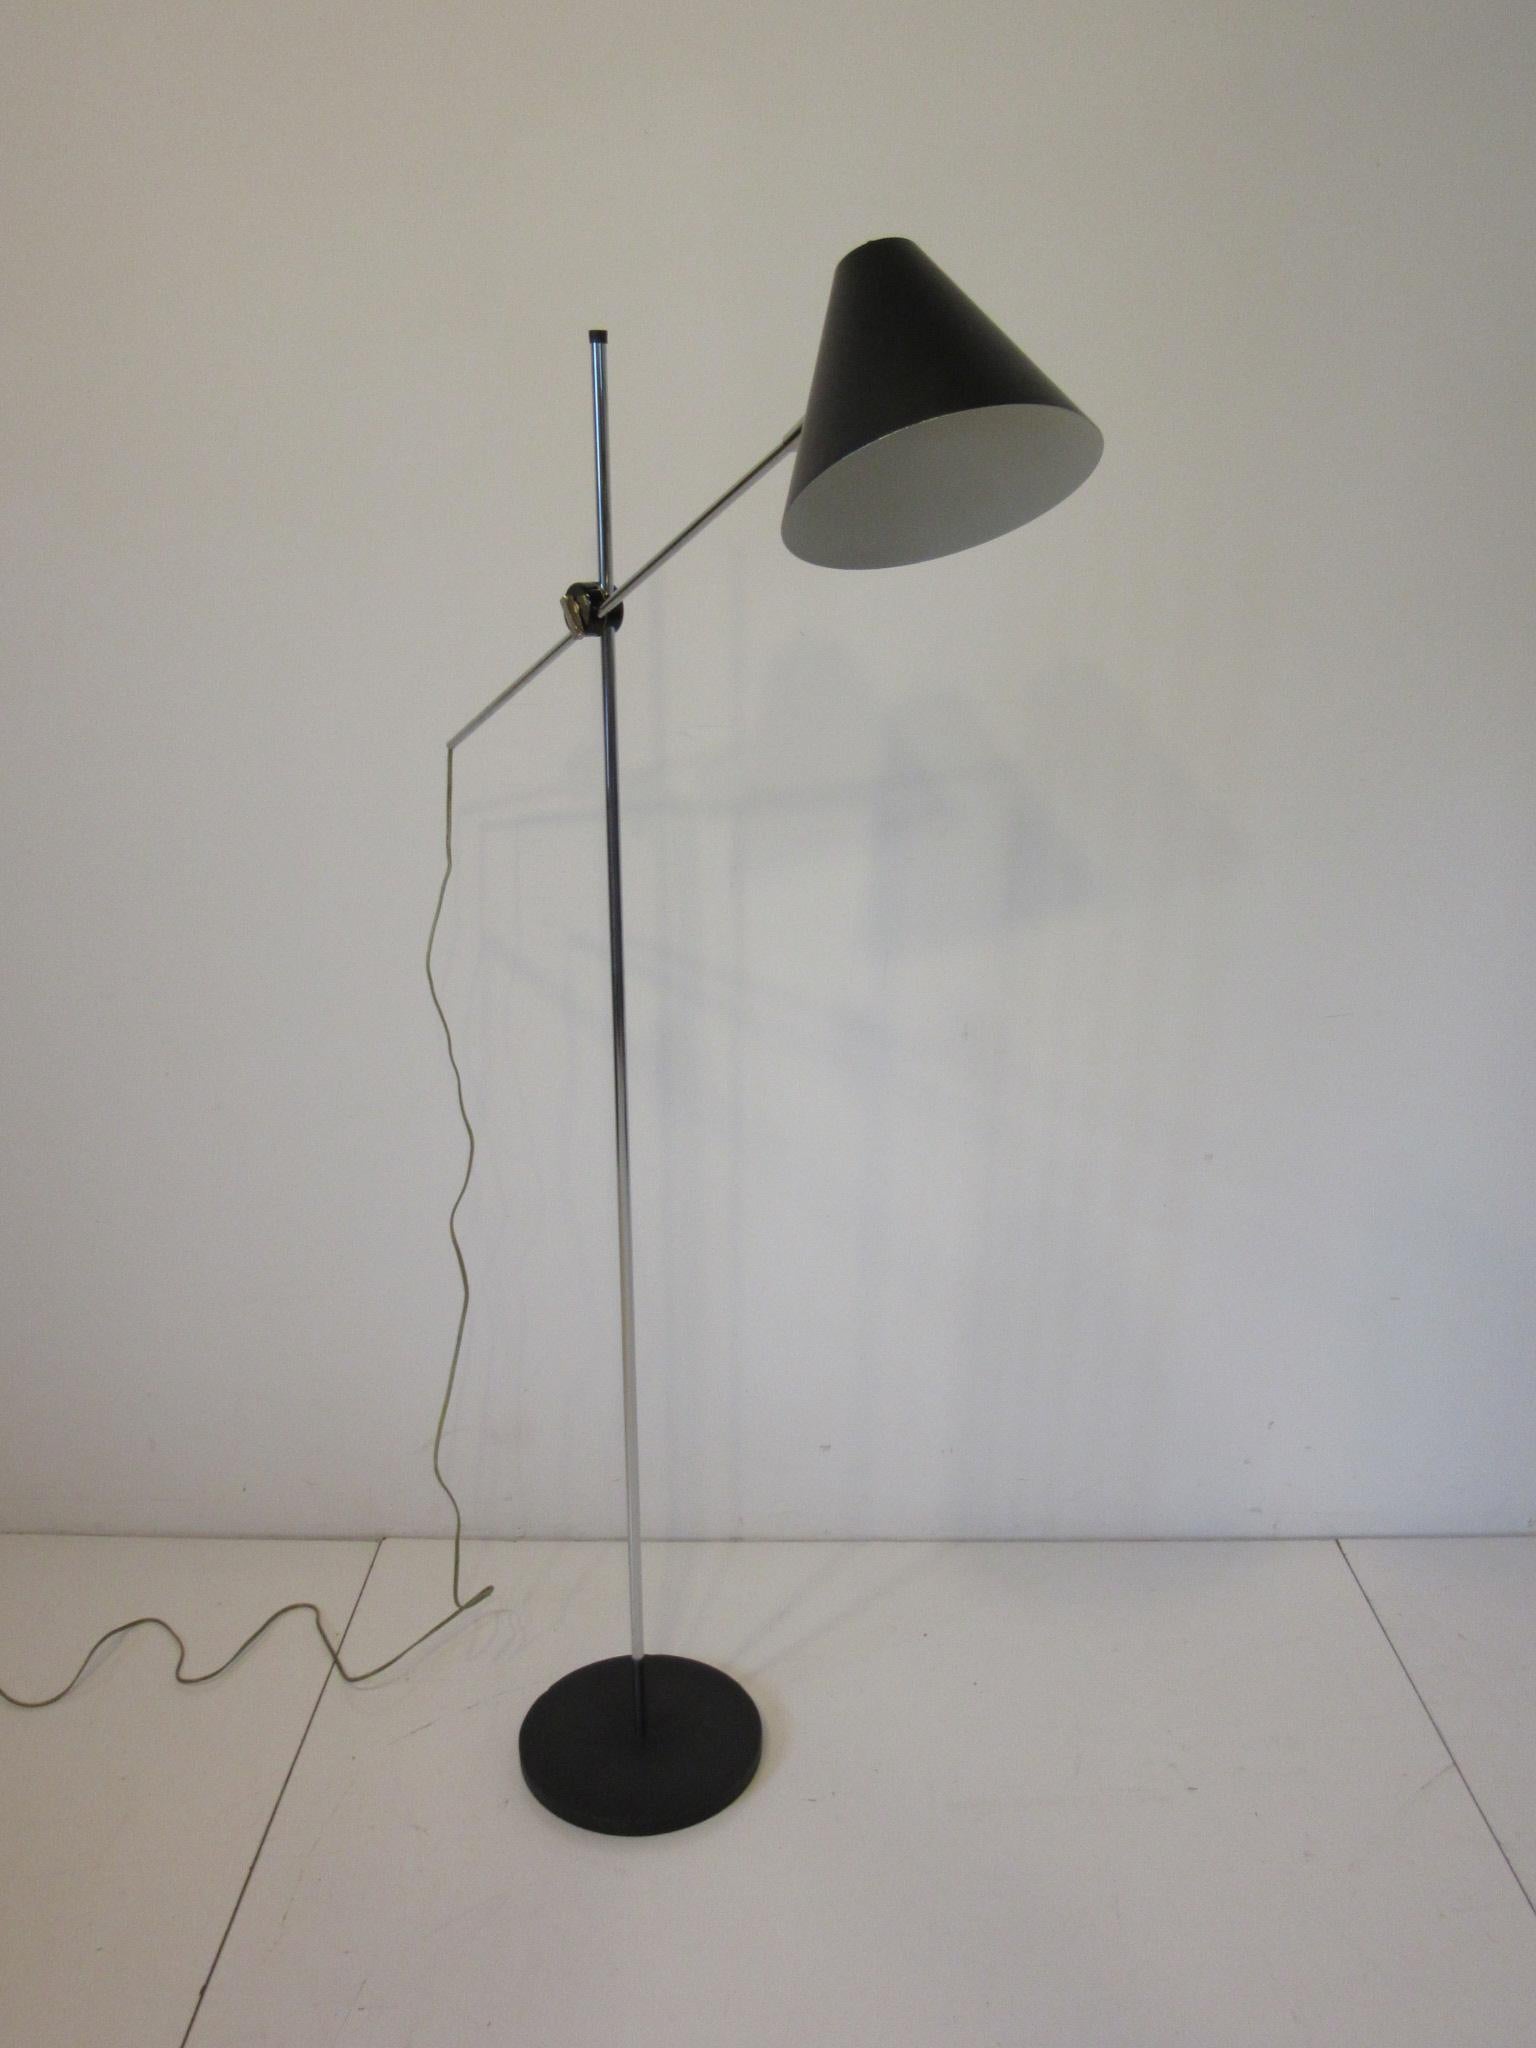 A chrome and satin black cone lamp with adjustable shade height and tilting designed and manufactured by the George Kovacs Lighting company.